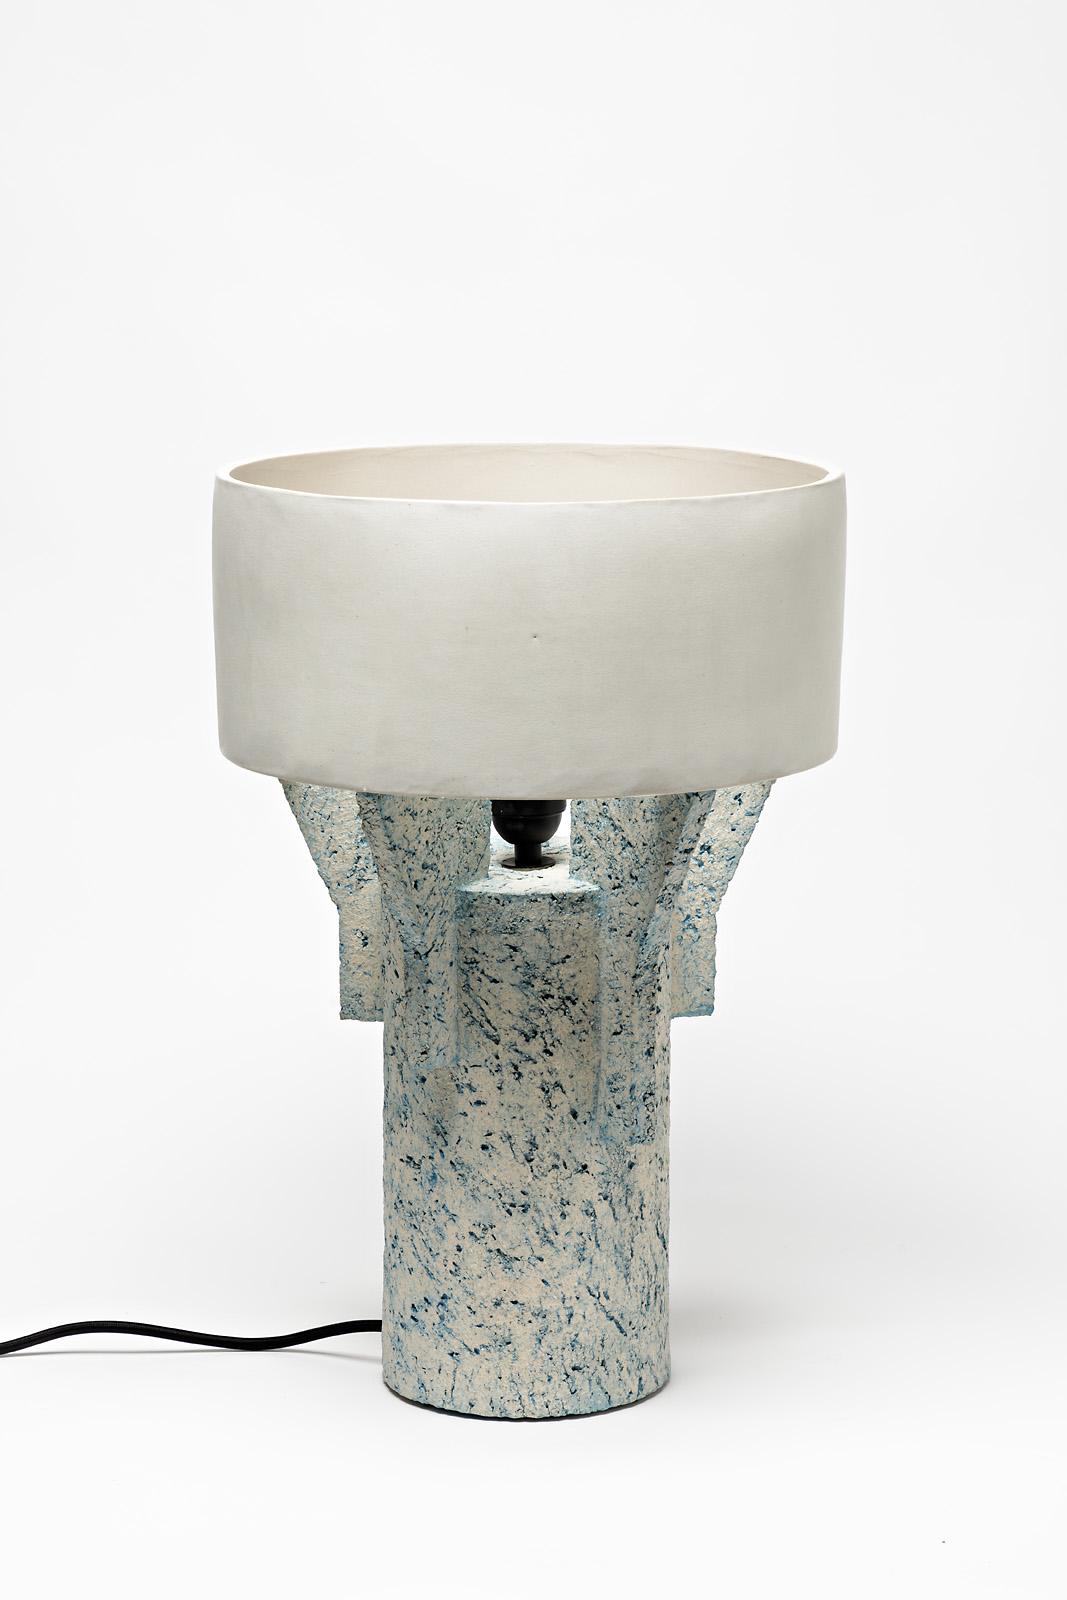 A ceramic table lamp by Denis Castaing with white glaze decoration.
The base and the lamp shade are in ceramic.
Sold with a European electrical system.
Perfect original conditions,
2019.
Signed under the base.